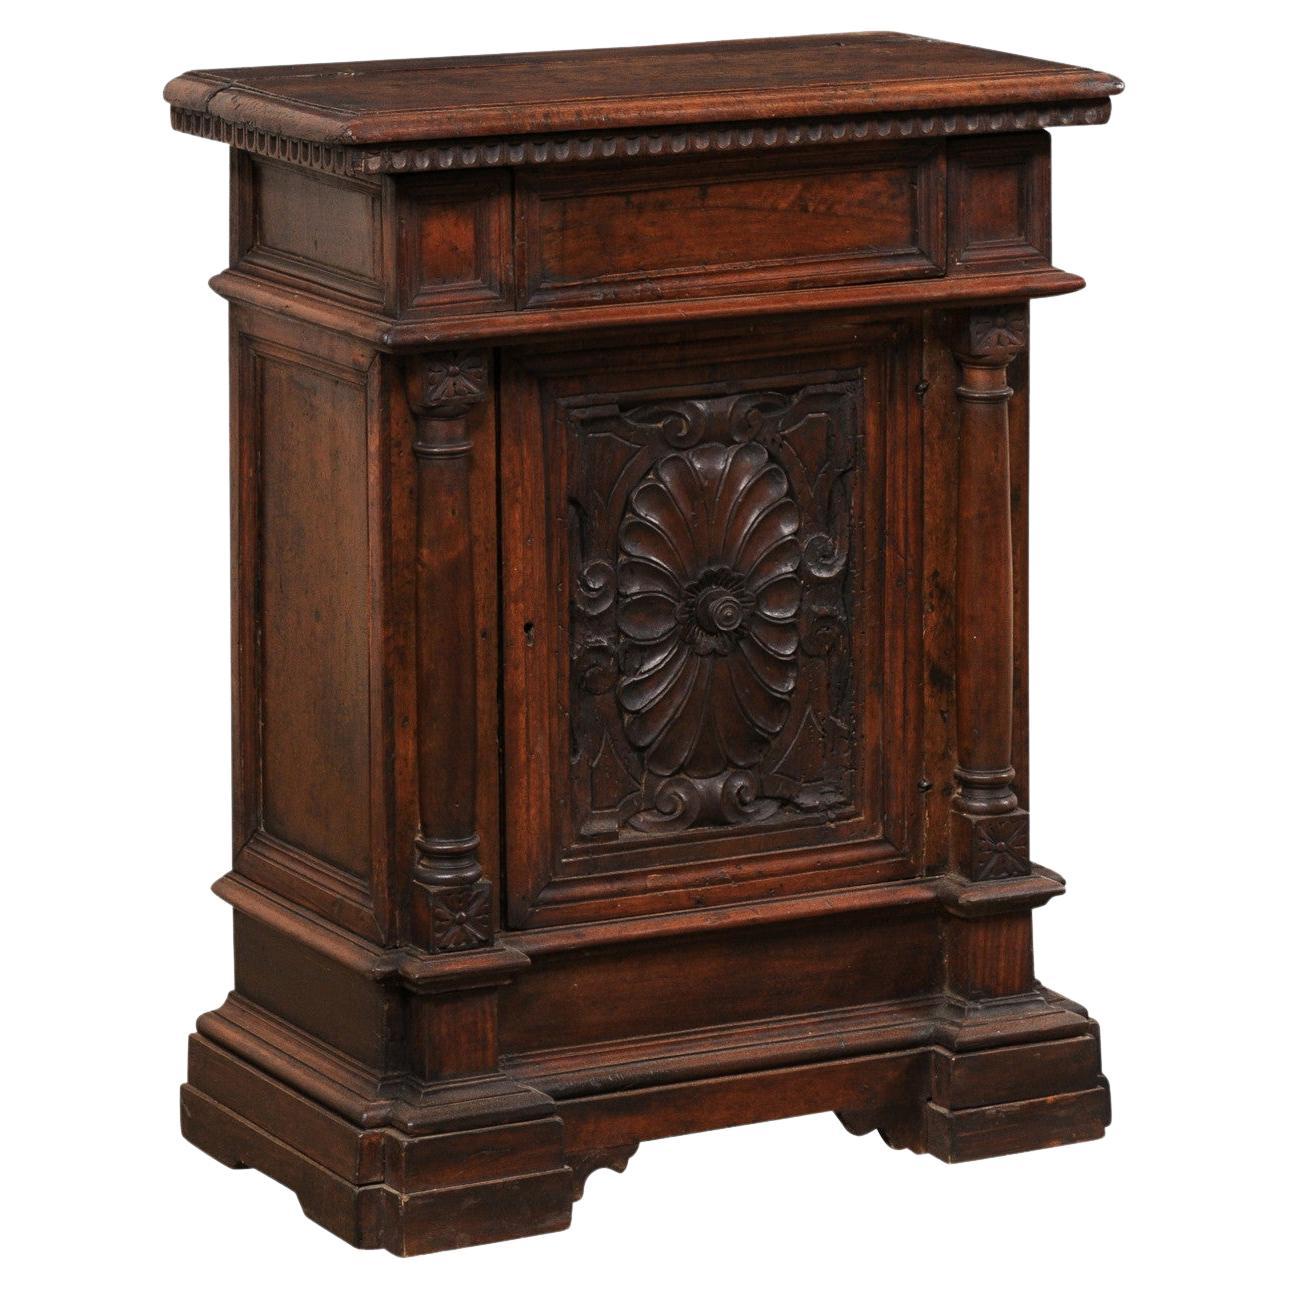 18th C. Italian Petite Nicely Carved Walnut Cabinet w/Floral Carved Panel Door